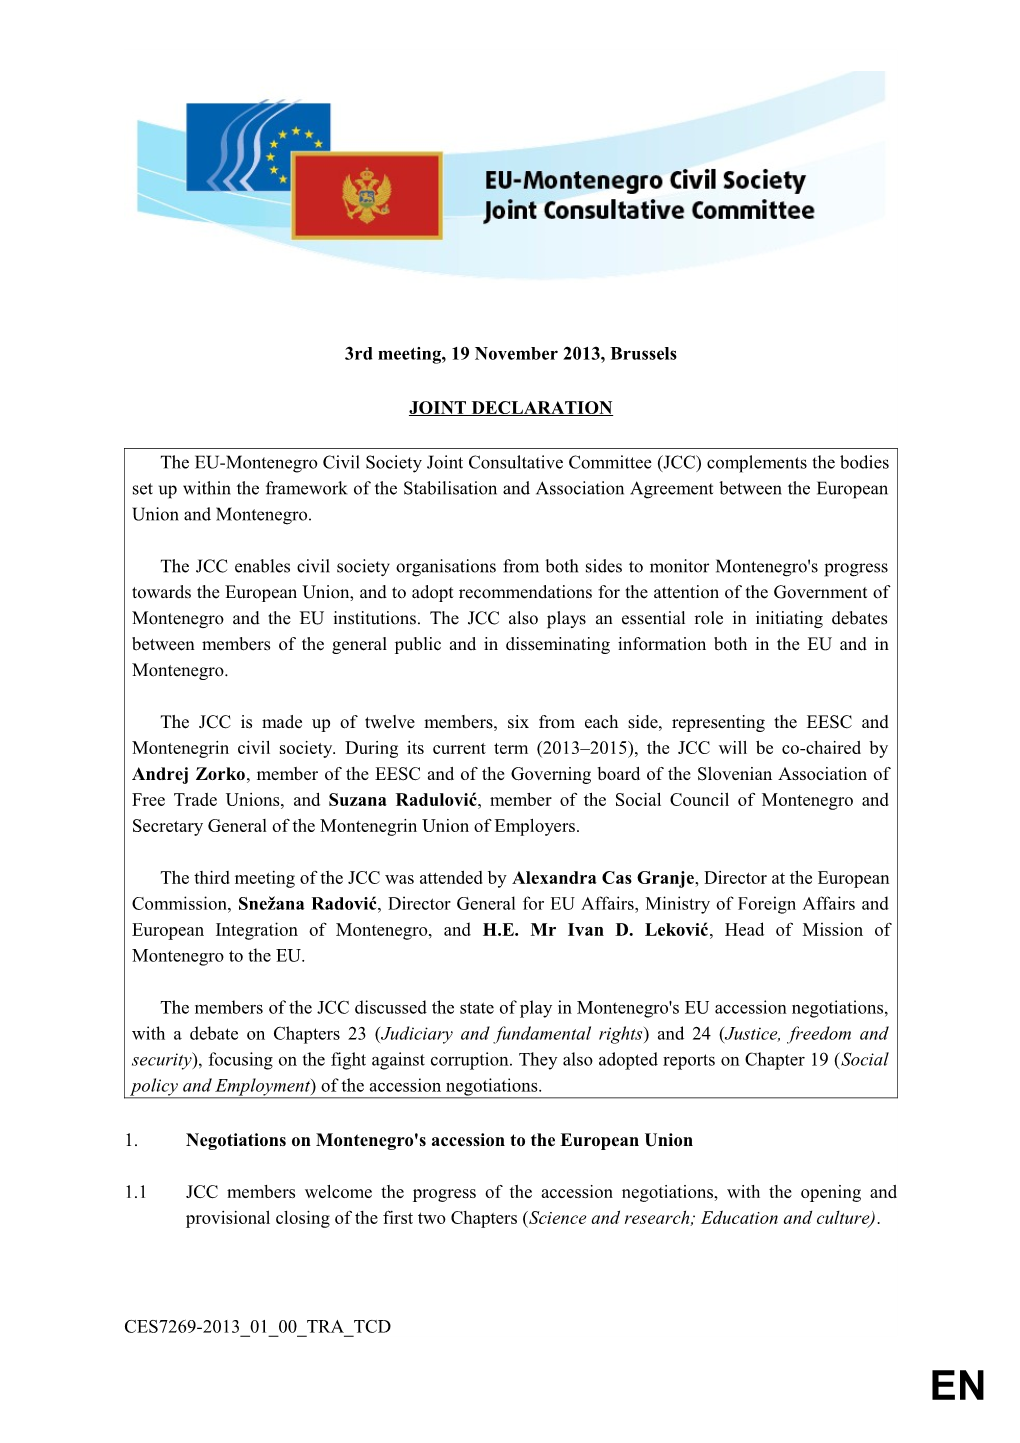 The EU-Montenegro Civil Society Joint Consultative Committee - Joint Declaration